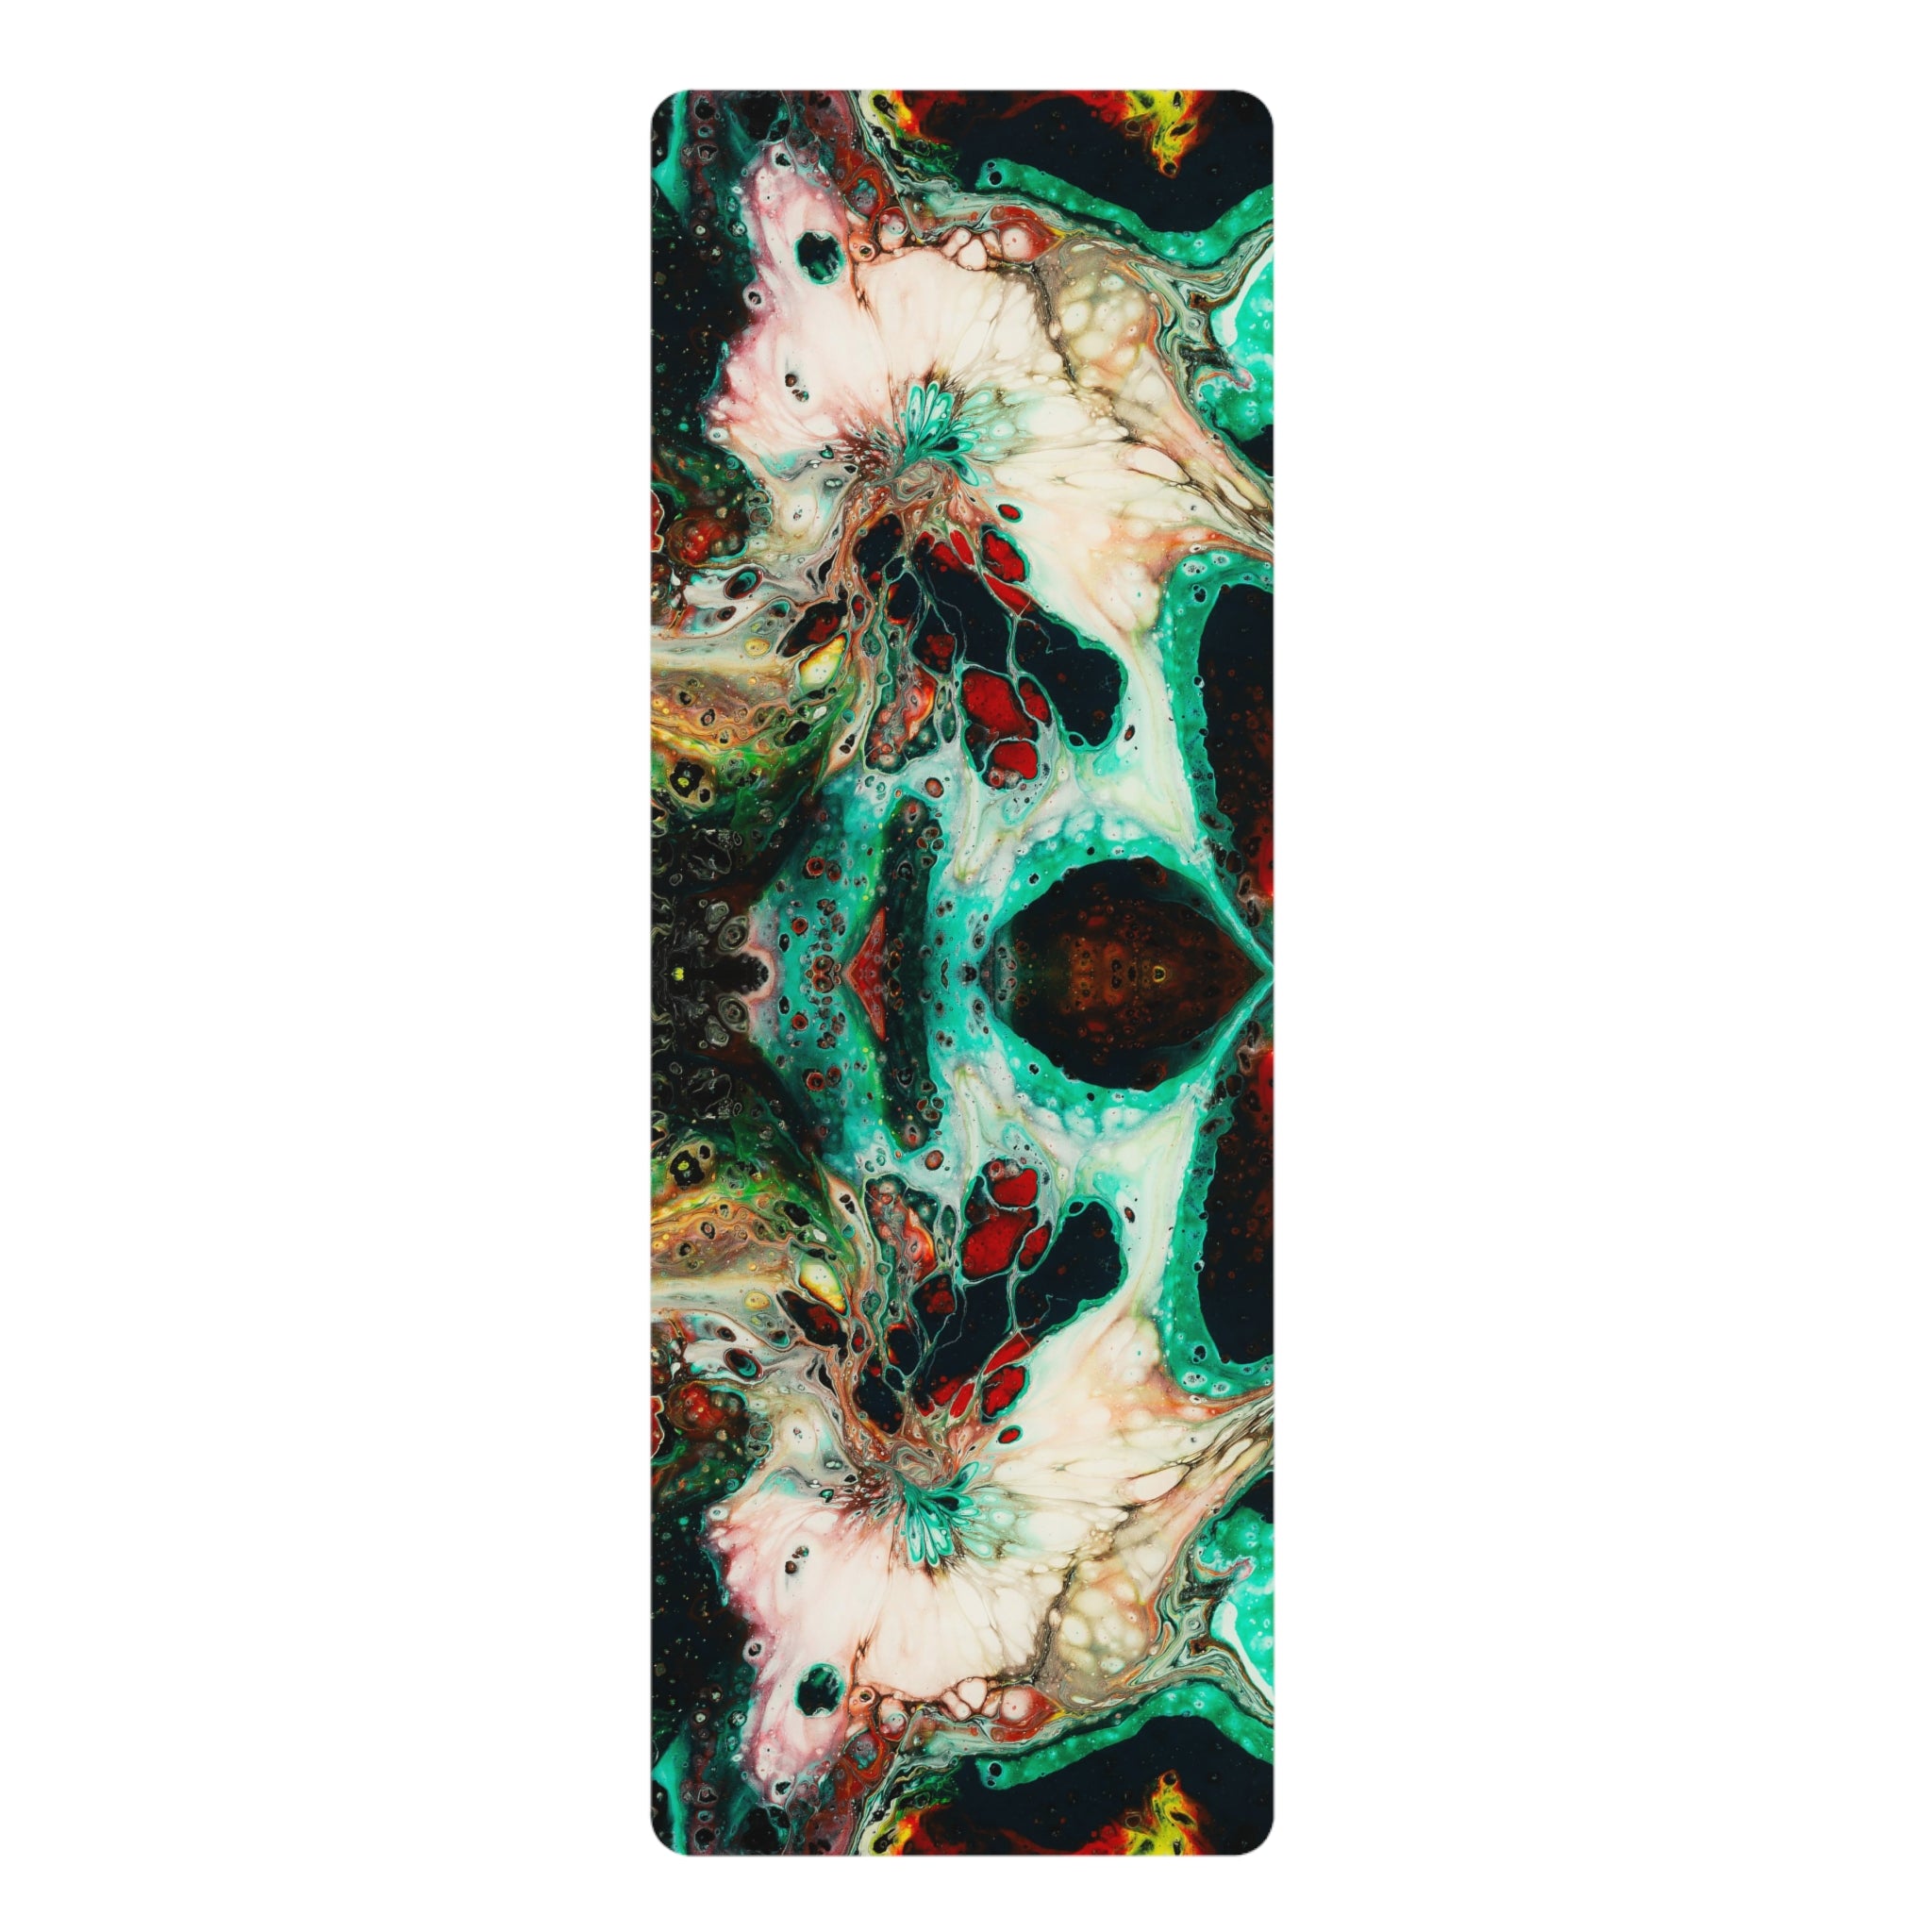 Flowers Of The Galaxy - Rubber Yoga Mat